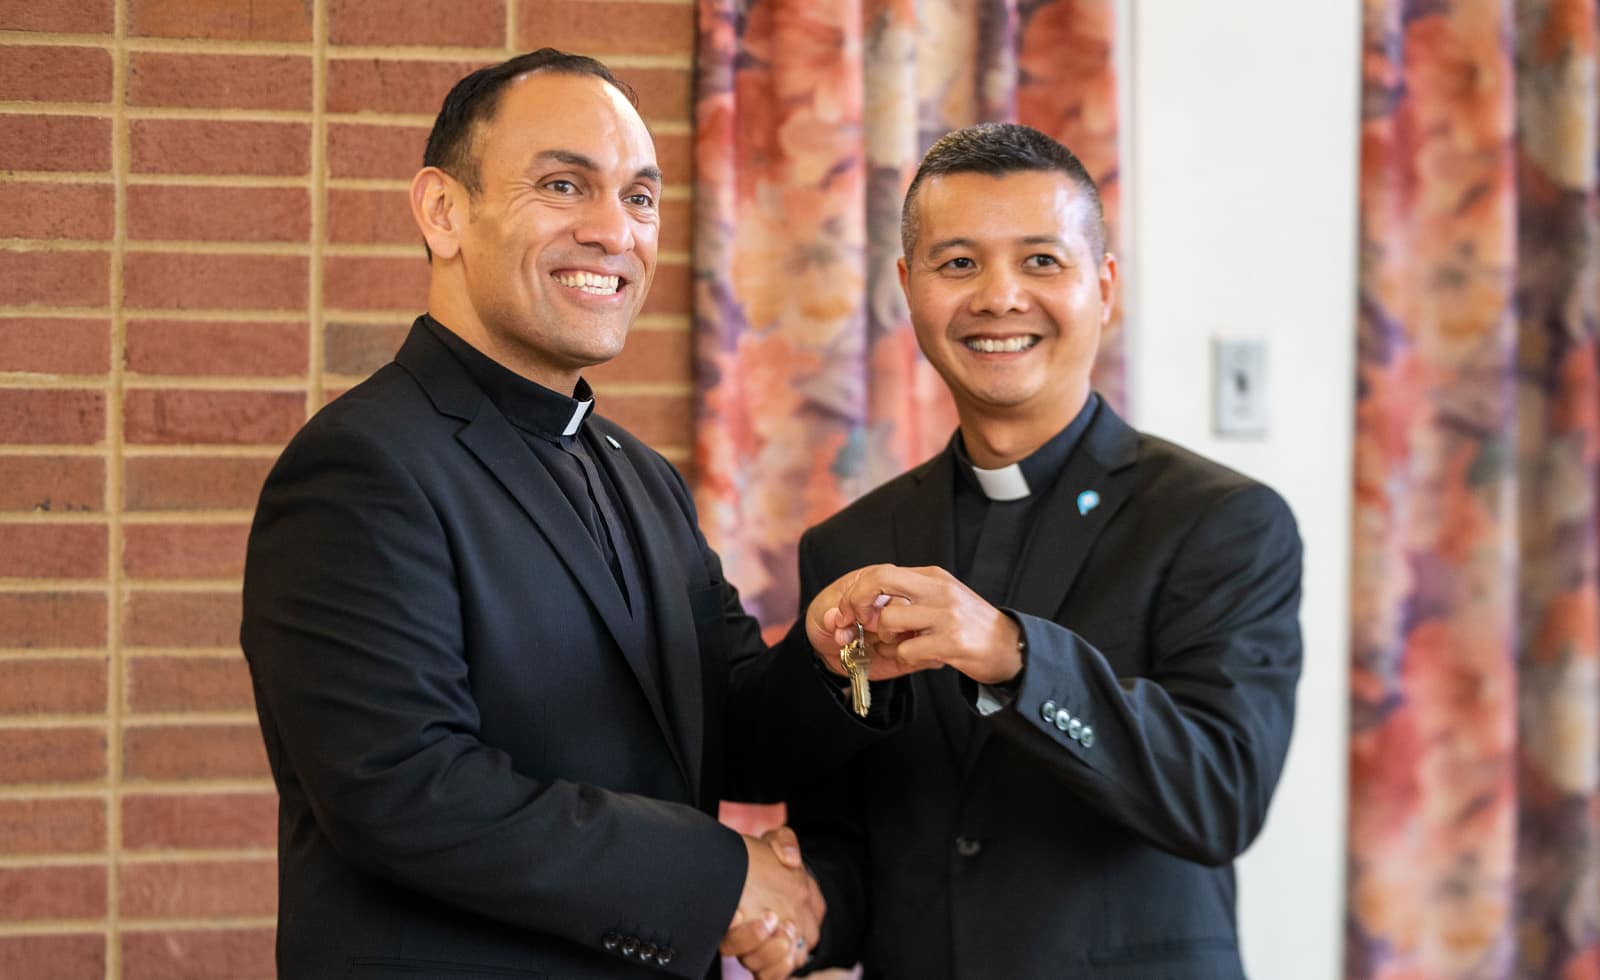 Handing off the keys to the cathedral: Paulist Fr. Dat Tran (right) will succeed the newly installed Paulist President Fr. René Constanza as pastor of the Cathedral of Saint Andrew in Grand Rapids, MI.